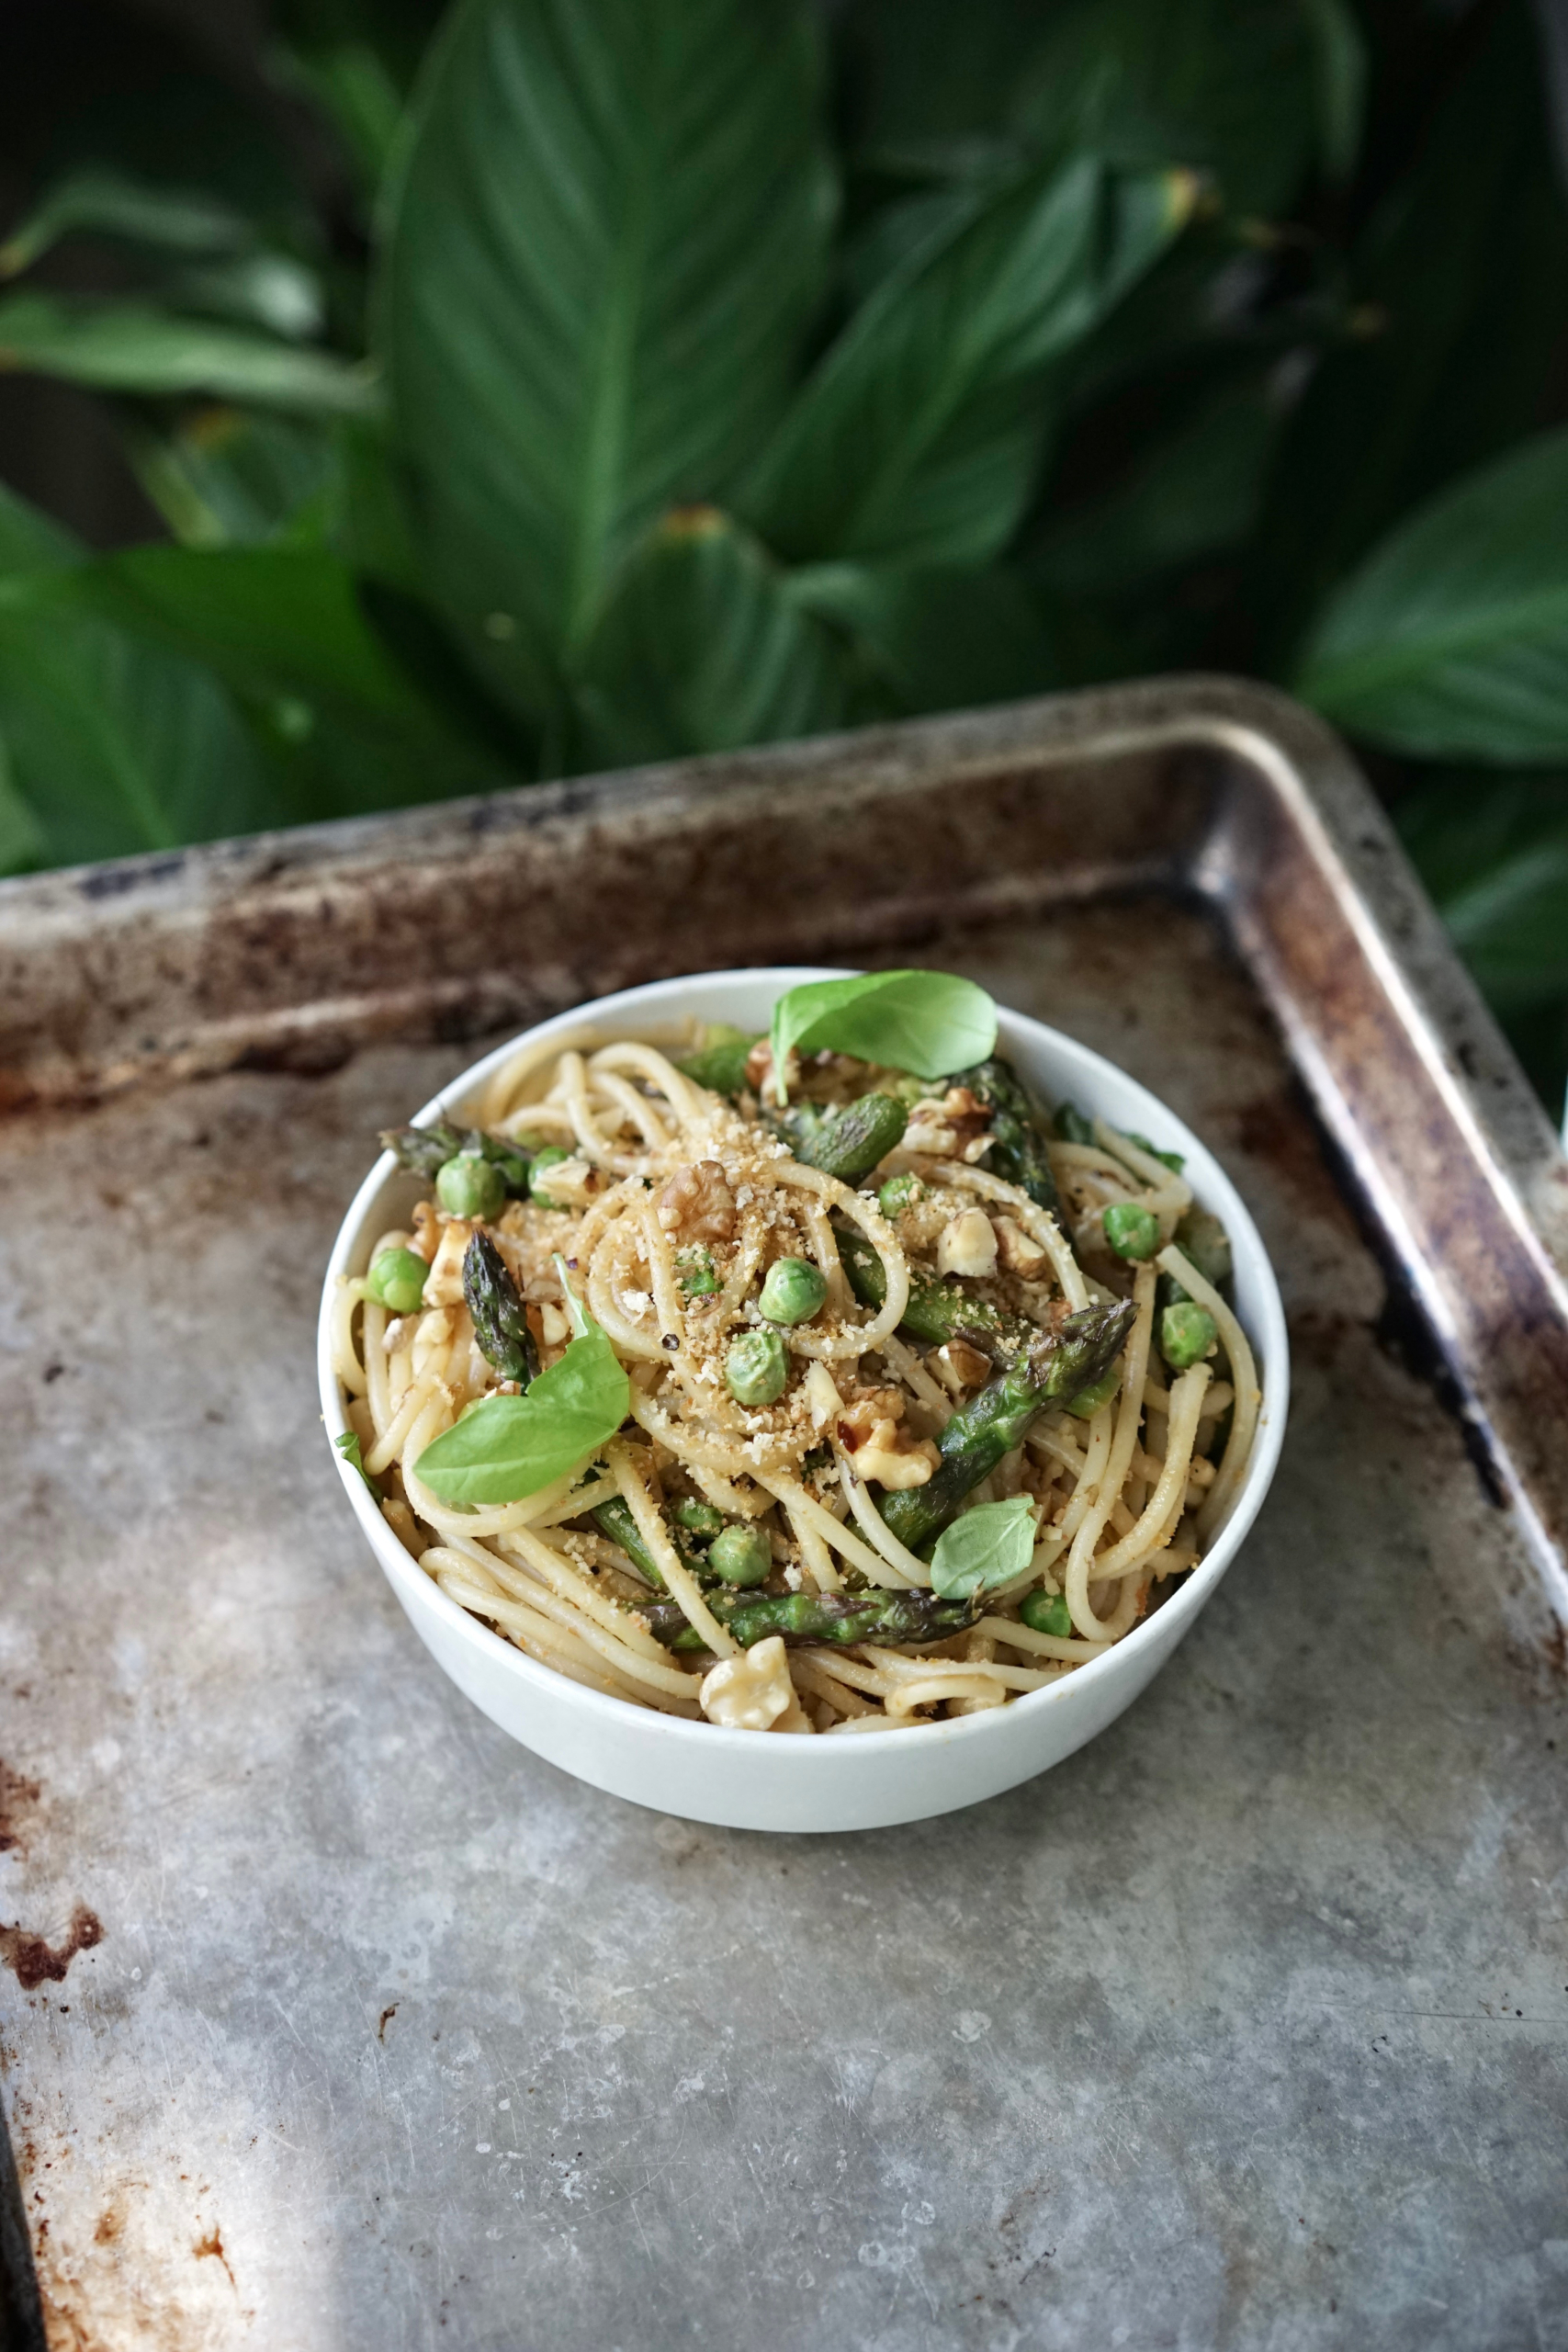 Lemony Spaghetti with Asparagus, Peas & Walnuts | Living Healthy in Seattle